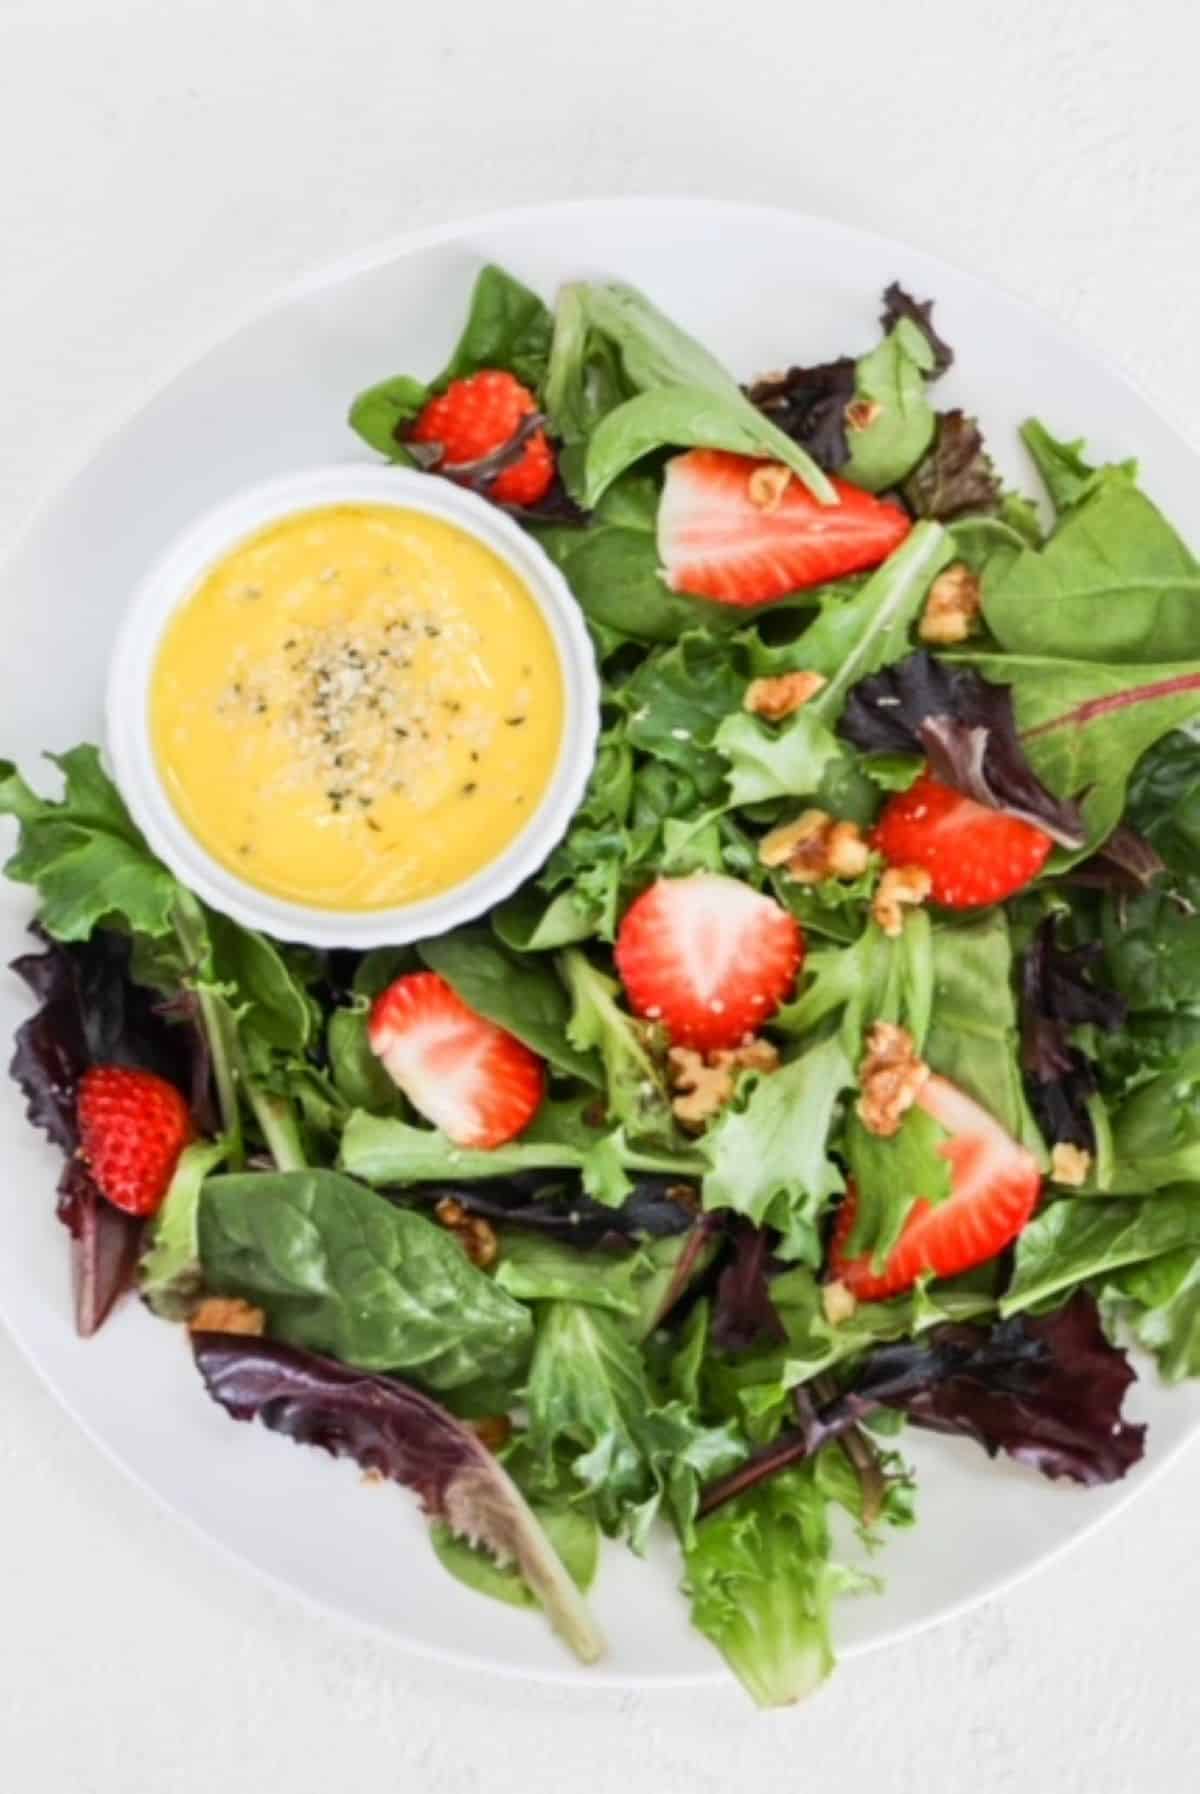 Mango salad dressing plated with a strawberry salad on a white plate.